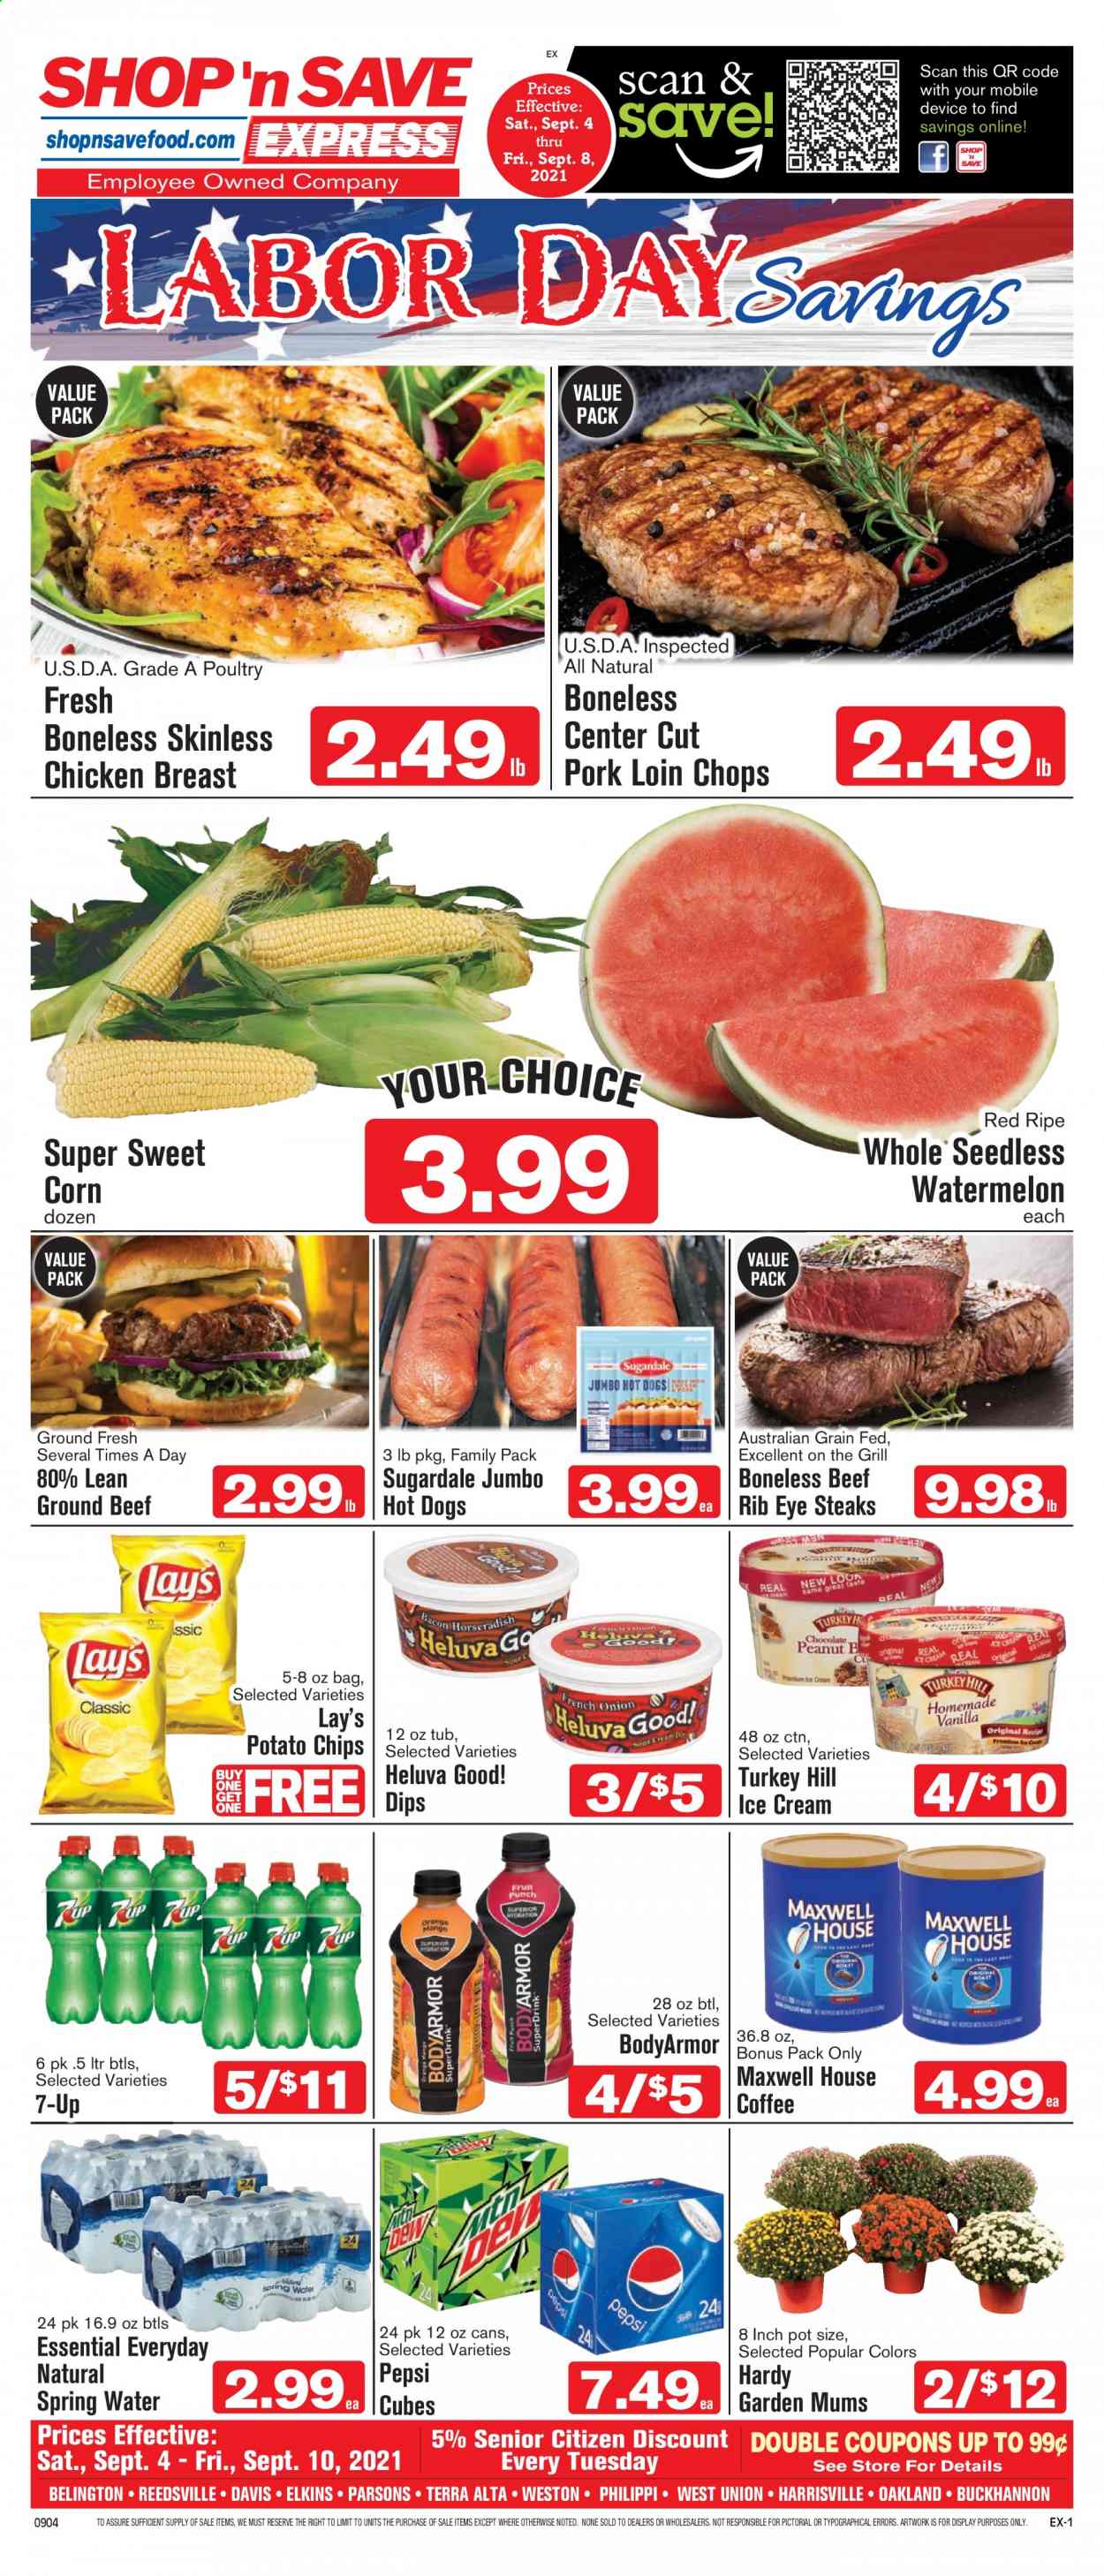 thumbnail - Shop ‘n Save Express Flyer - 09/04/2021 - 09/10/2021 - Sales products - corn, sweet corn, watermelon, chicken breasts, beef meat, ground beef, steak, pork chops, pork loin, pork meat, hot dog, Sugardale, ice cream, potato chips, chips, Lay’s, Pepsi, 7UP, spring water, Maxwell House, coffee. Page 1.